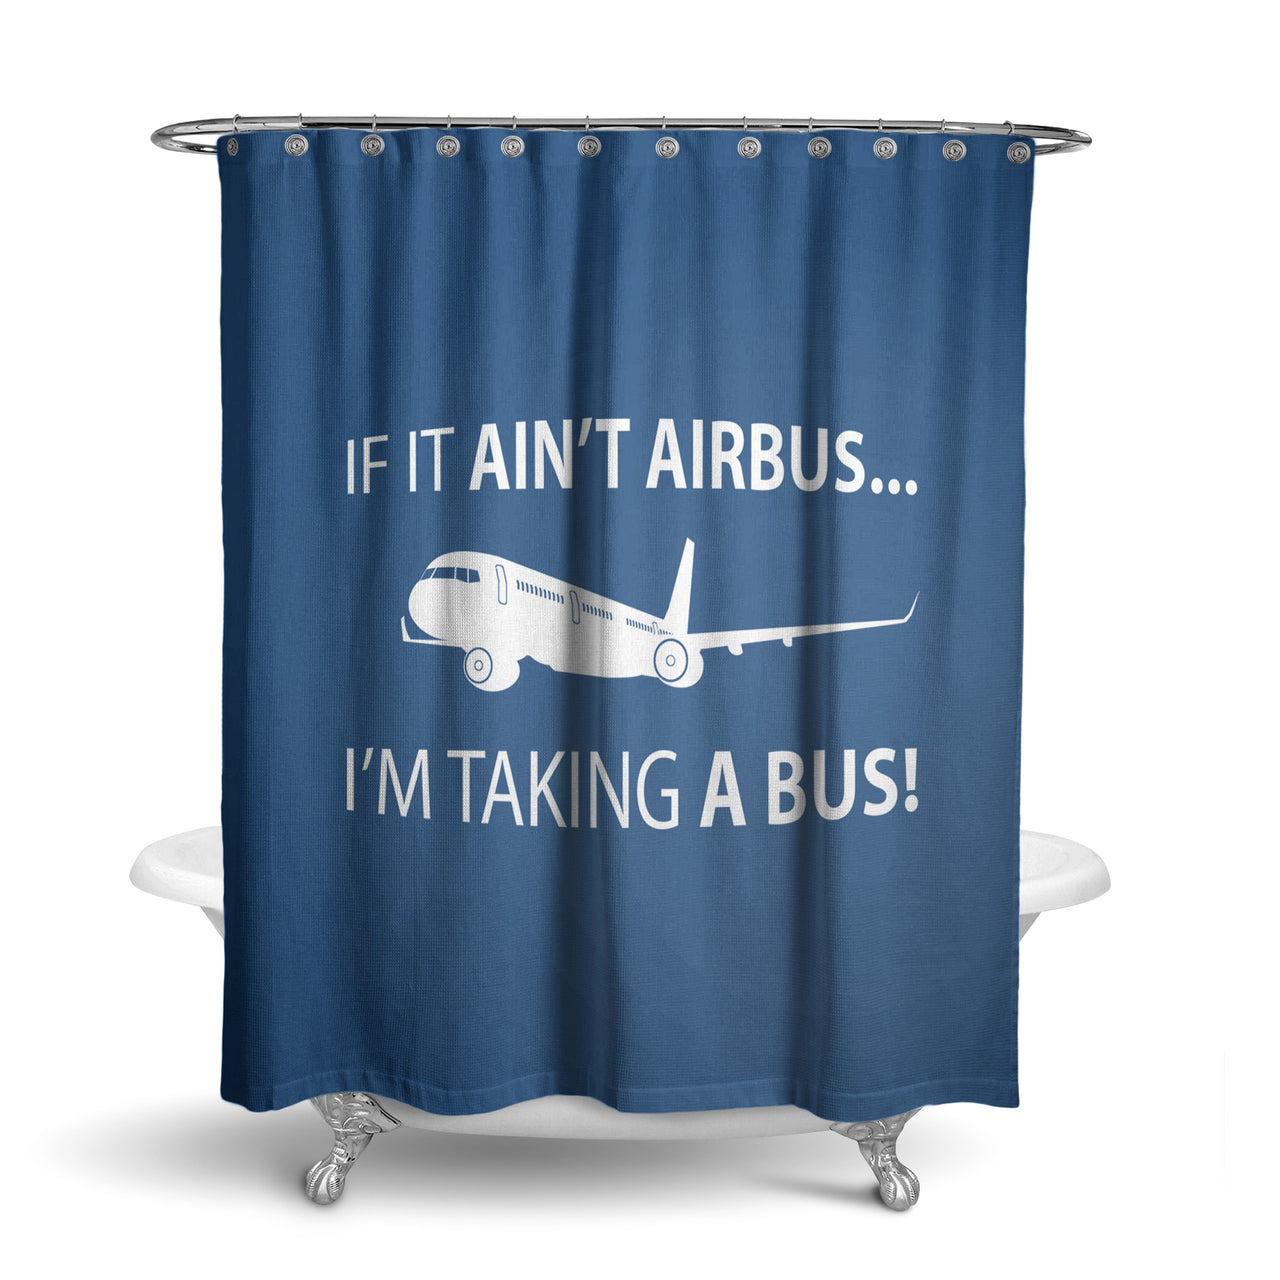 If It Ain't Airbus I'm Taking A Bus Designed Shower Curtains